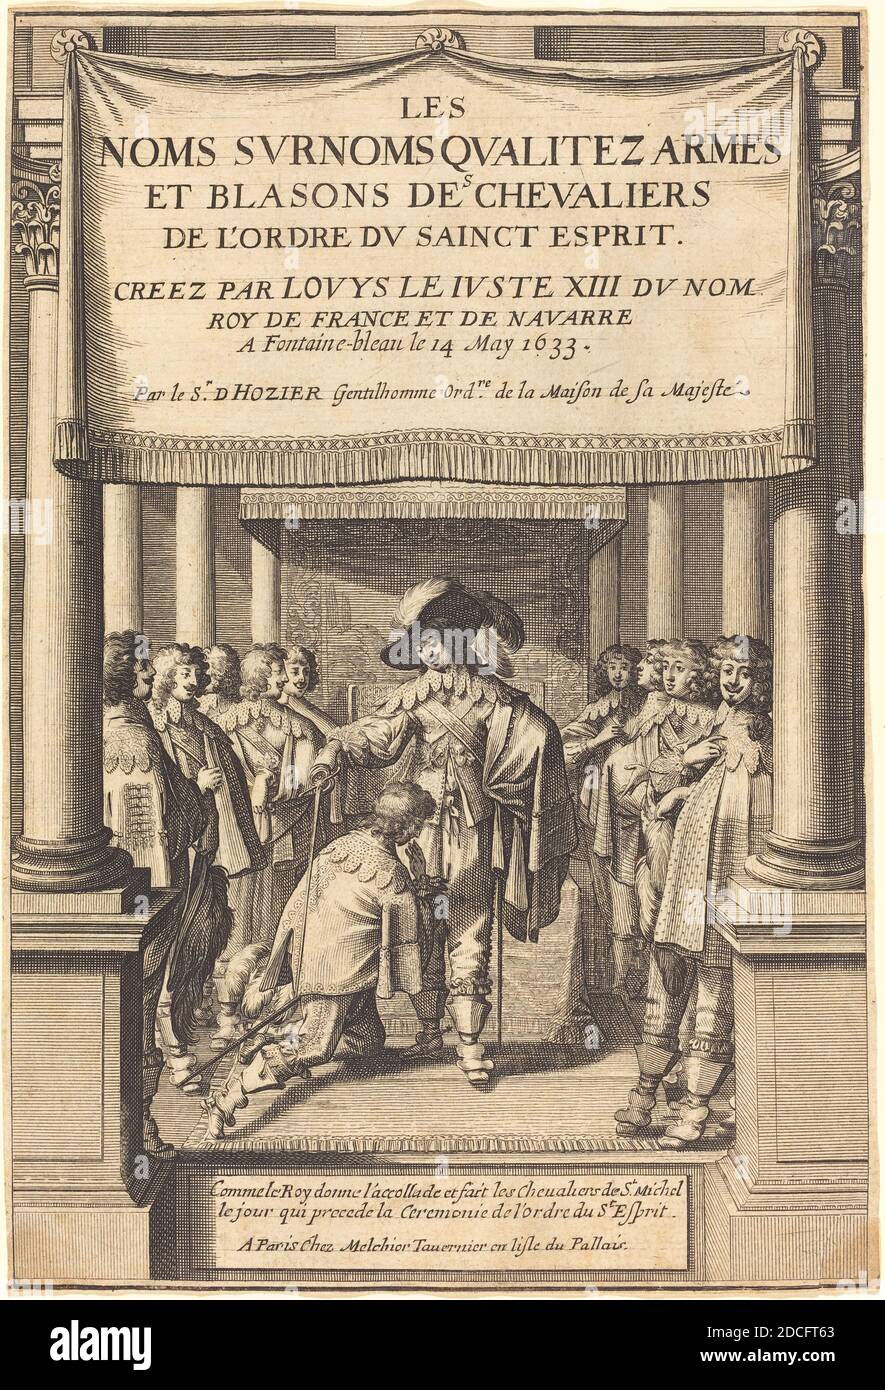 Abraham Bosse, (artist), French, 1602 - 1676, The King Giving the Accolade and Creating Knights of S. Michel Who Receive the Order of the Holy Spirit, Ceremonies Observed by King Louis XIII, (series), 1633, etching and engraving Stock Photo